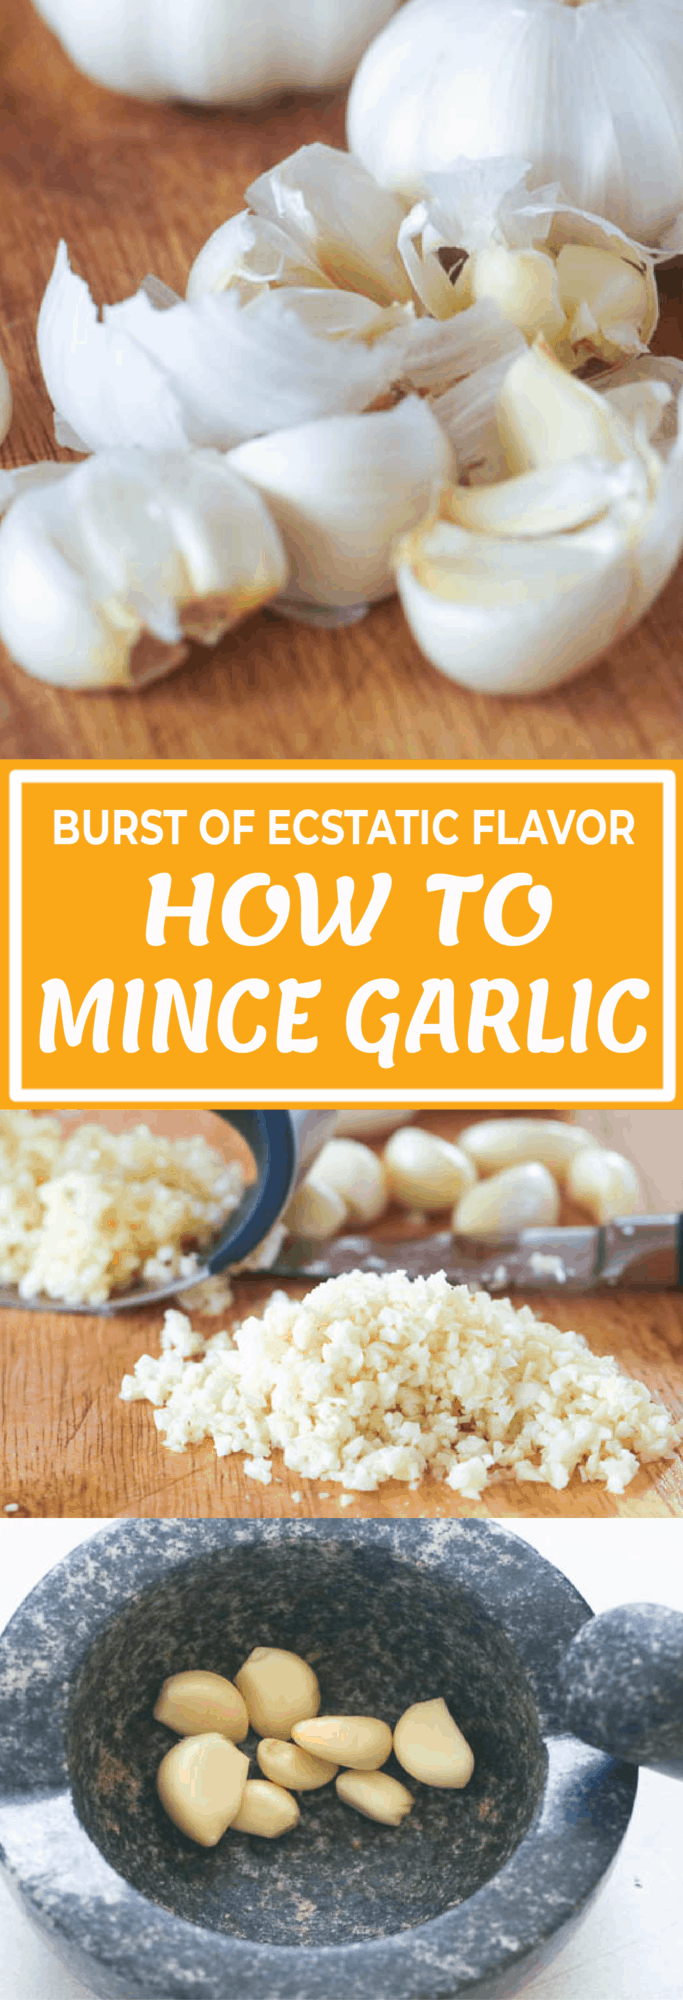 How to Mince Garlic